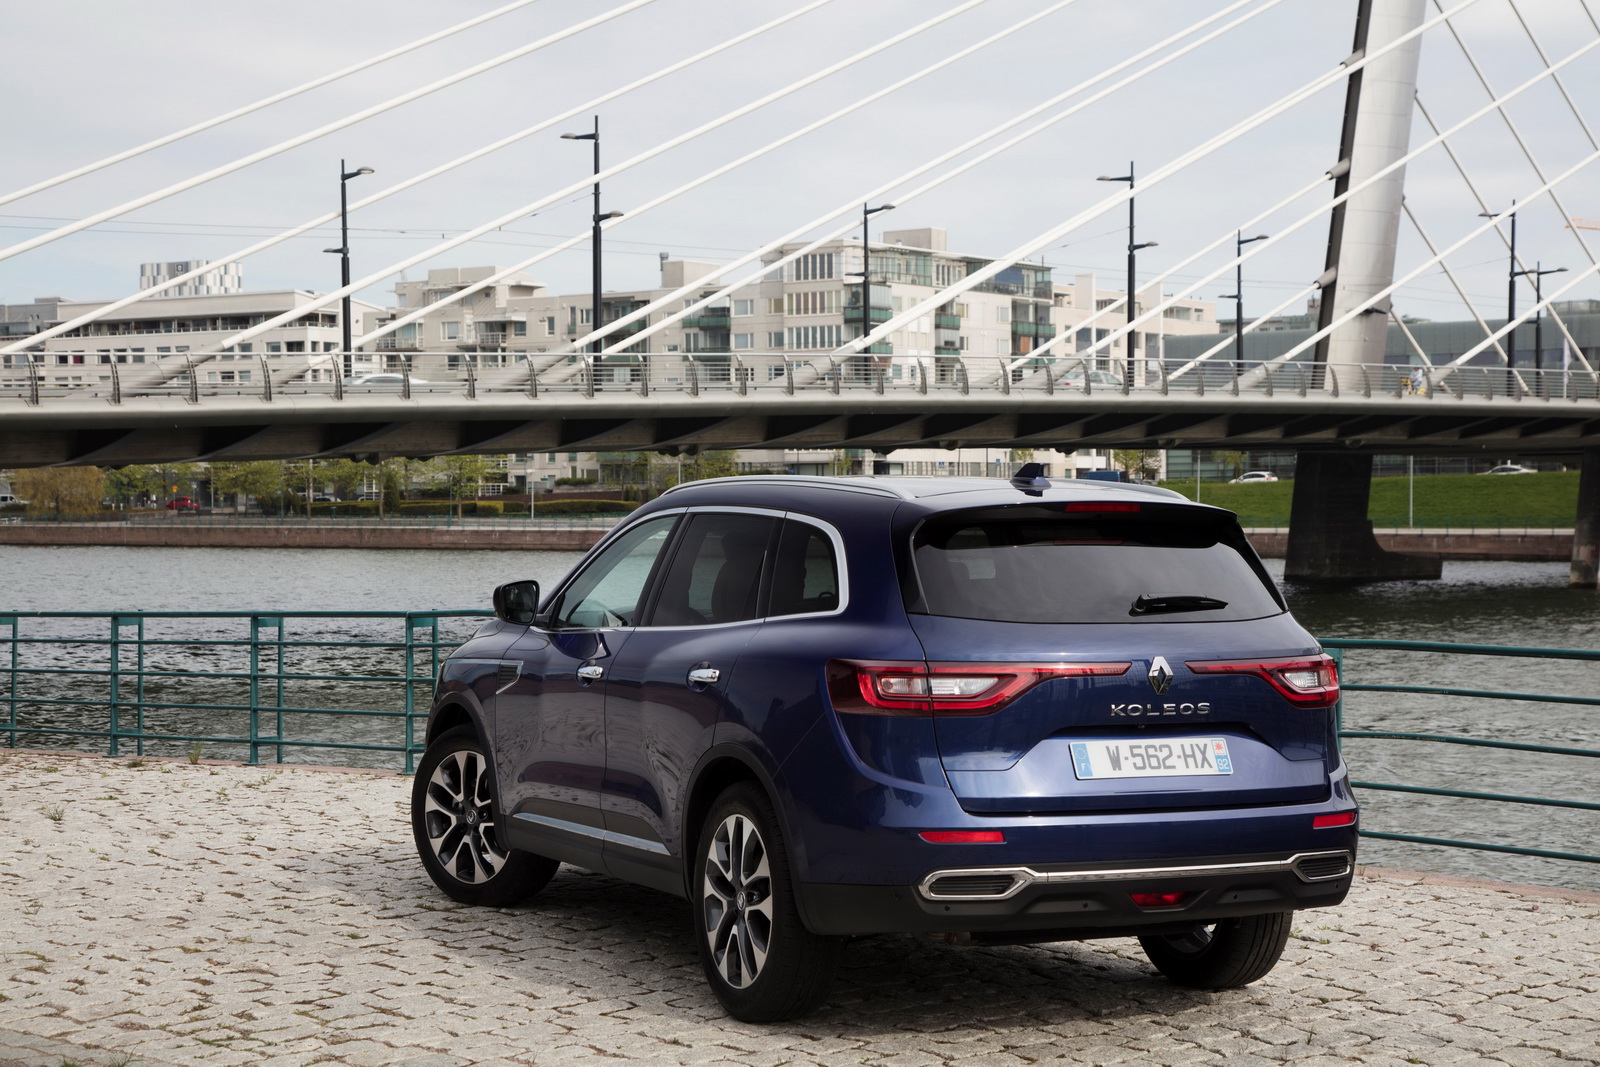 Get A Look At Renault’s New Euro Koleos SUV In 123 Images | Carscoops